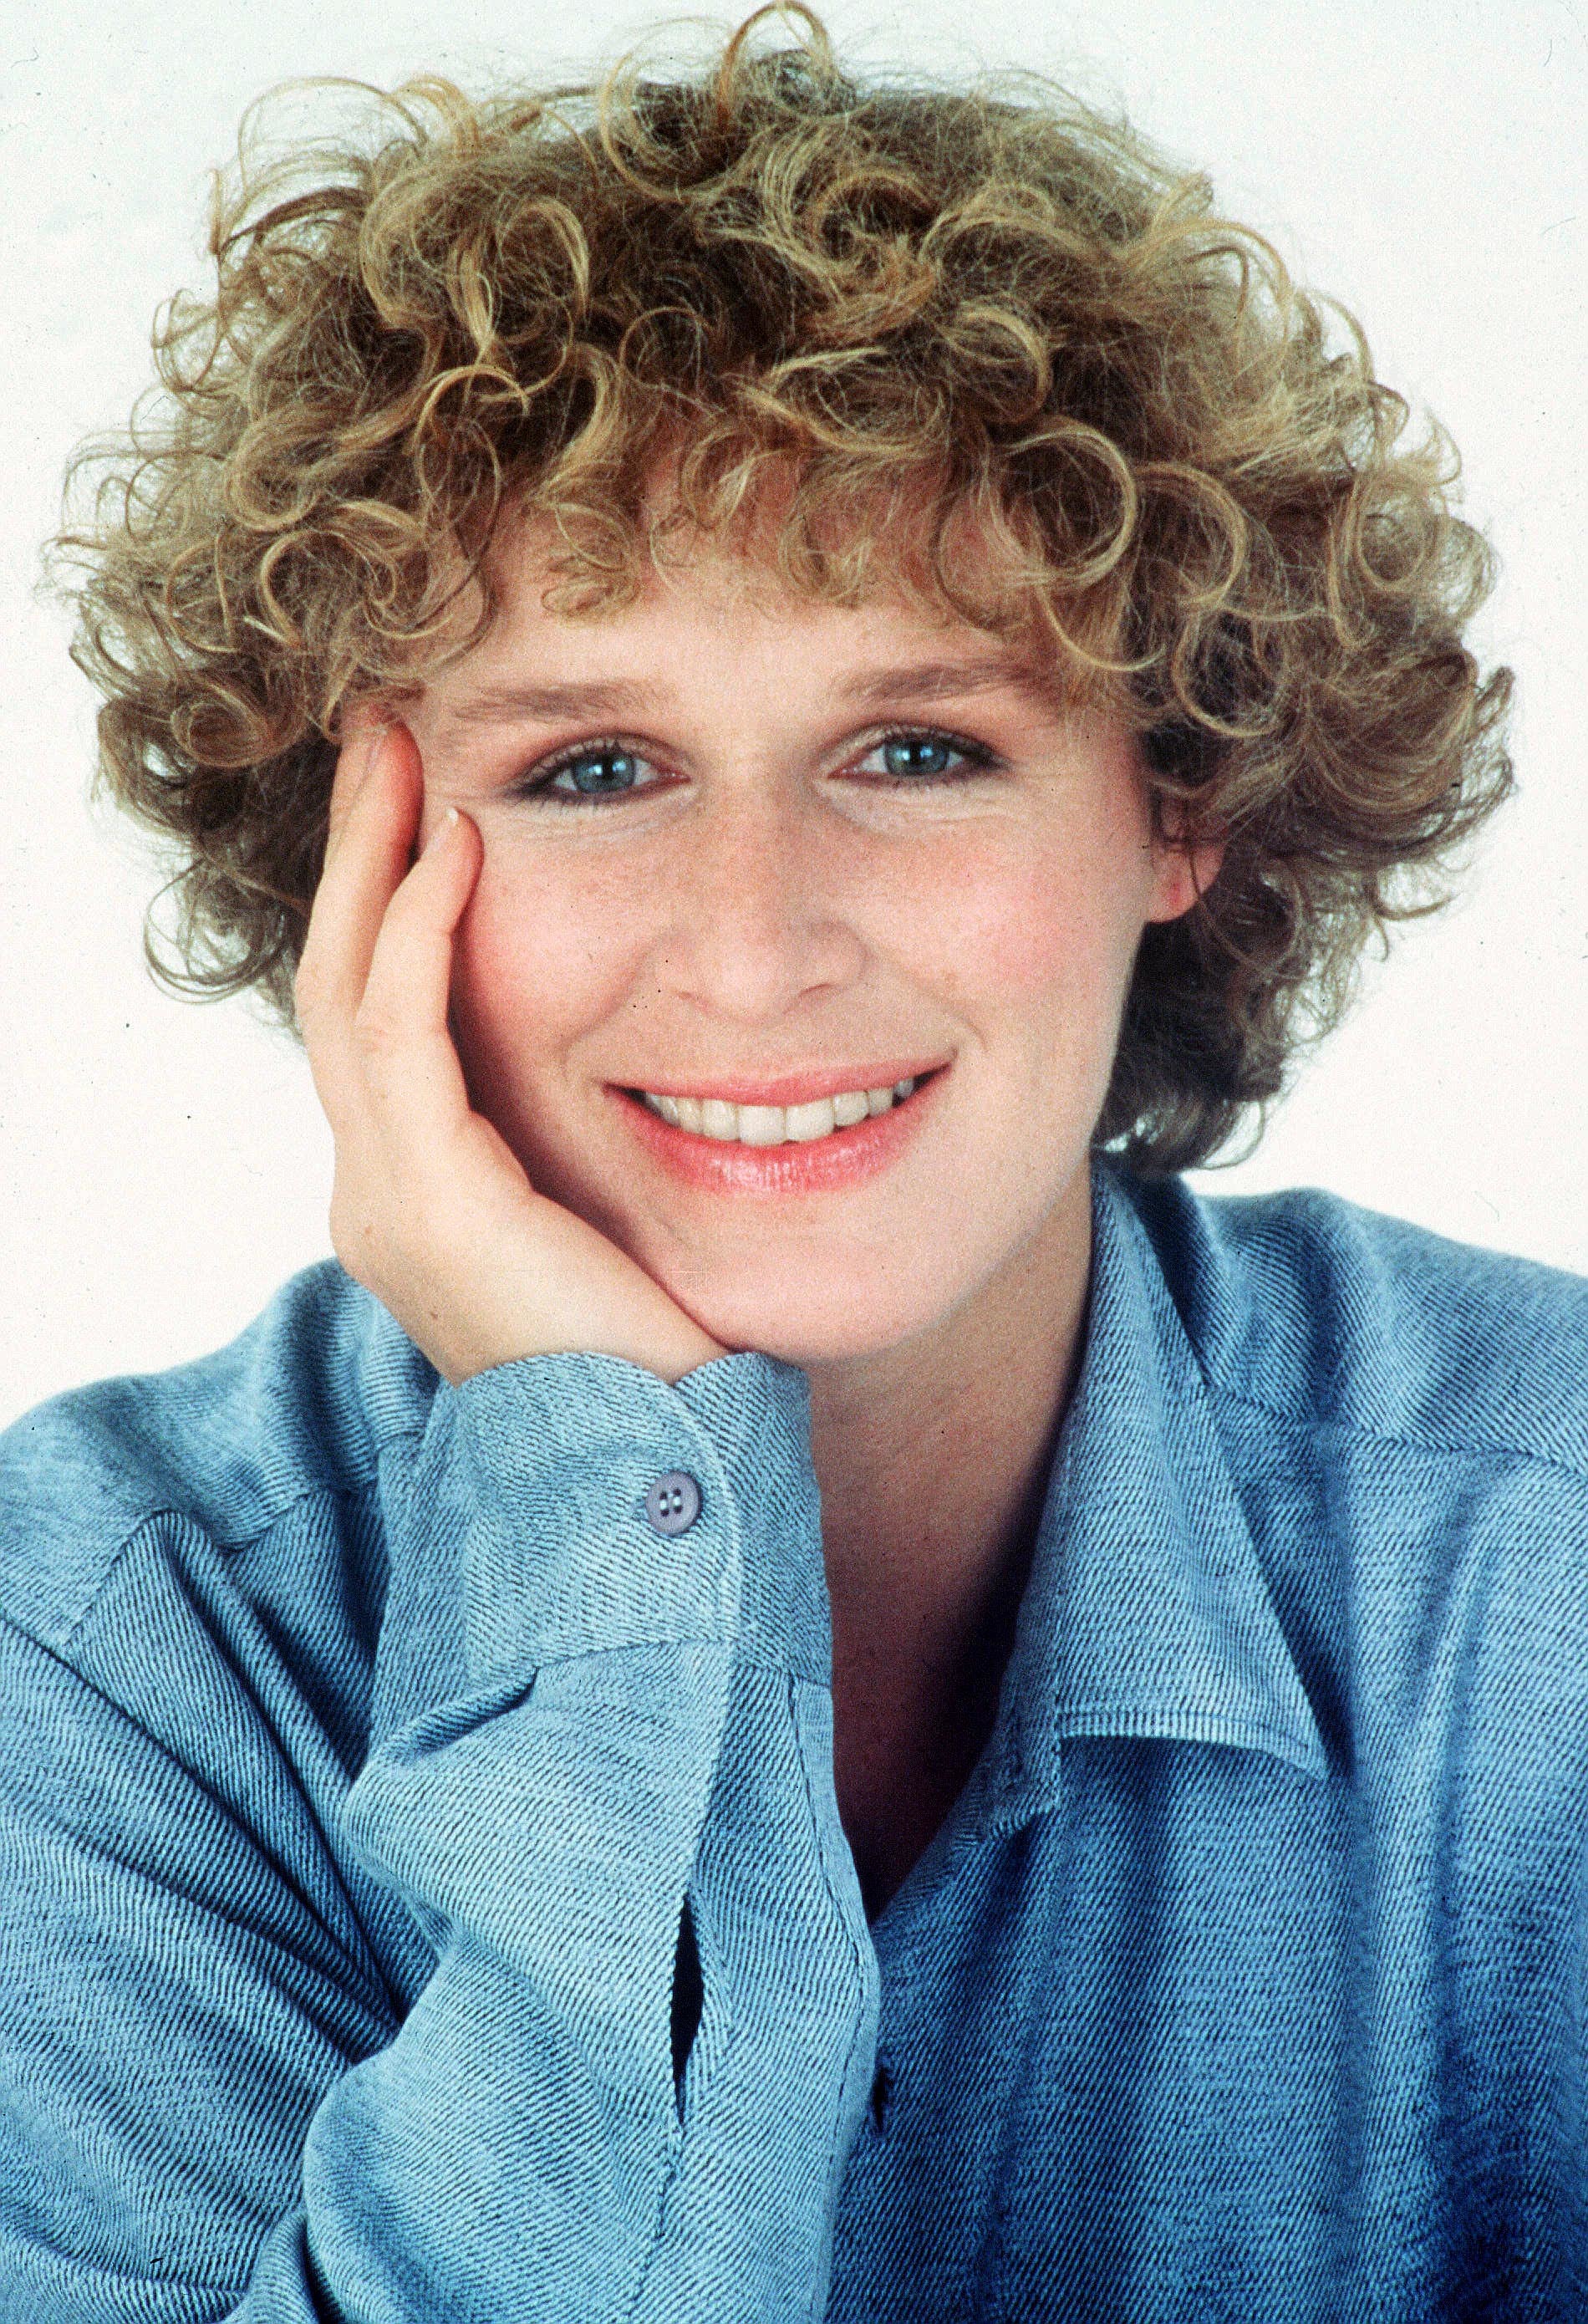 Glenn Close's life in pictures Gallery